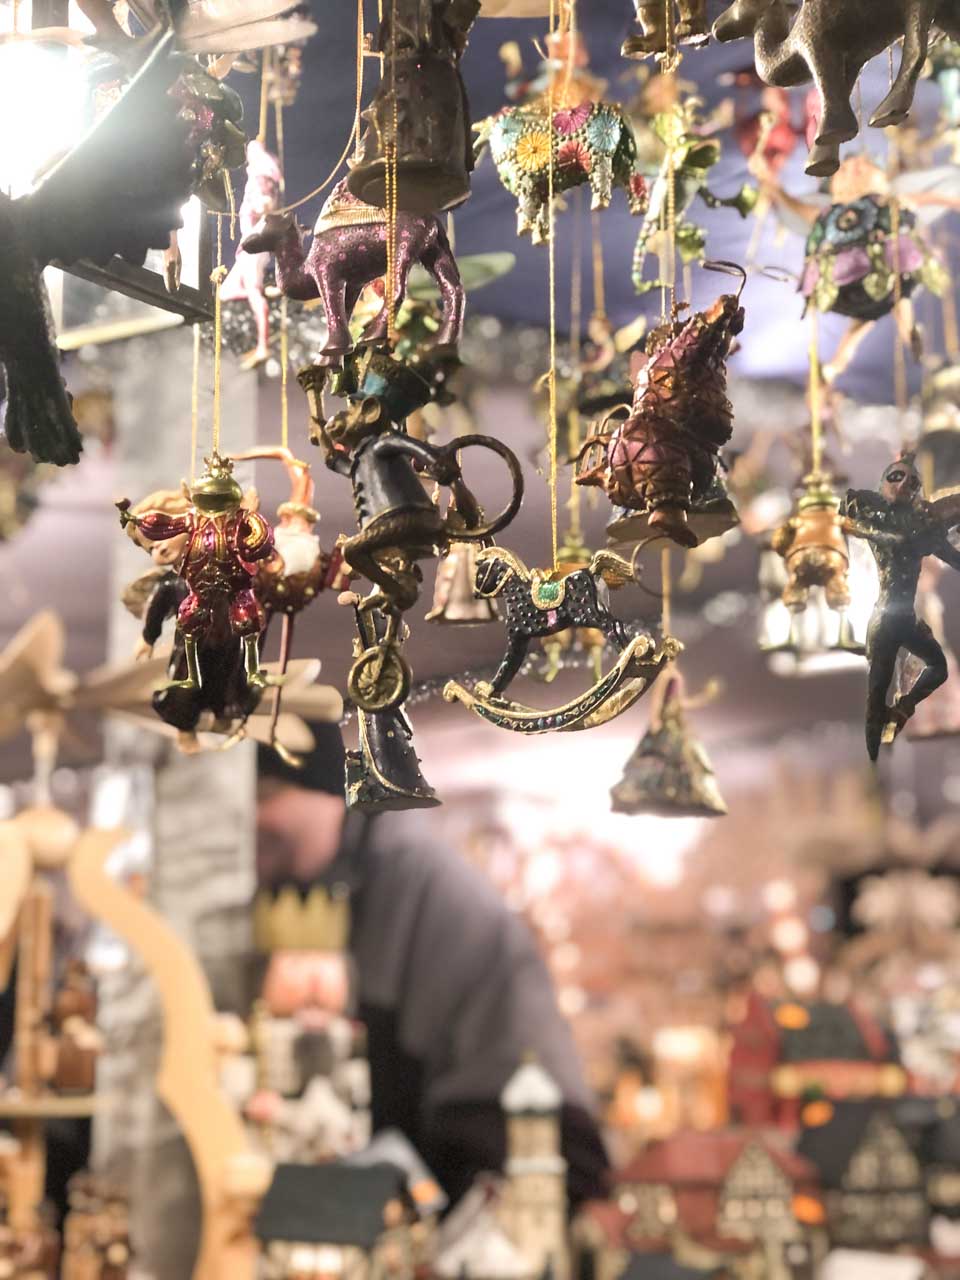 An array of delicate hanging ornaments at the Christkindlesmarkt in Nuremberg